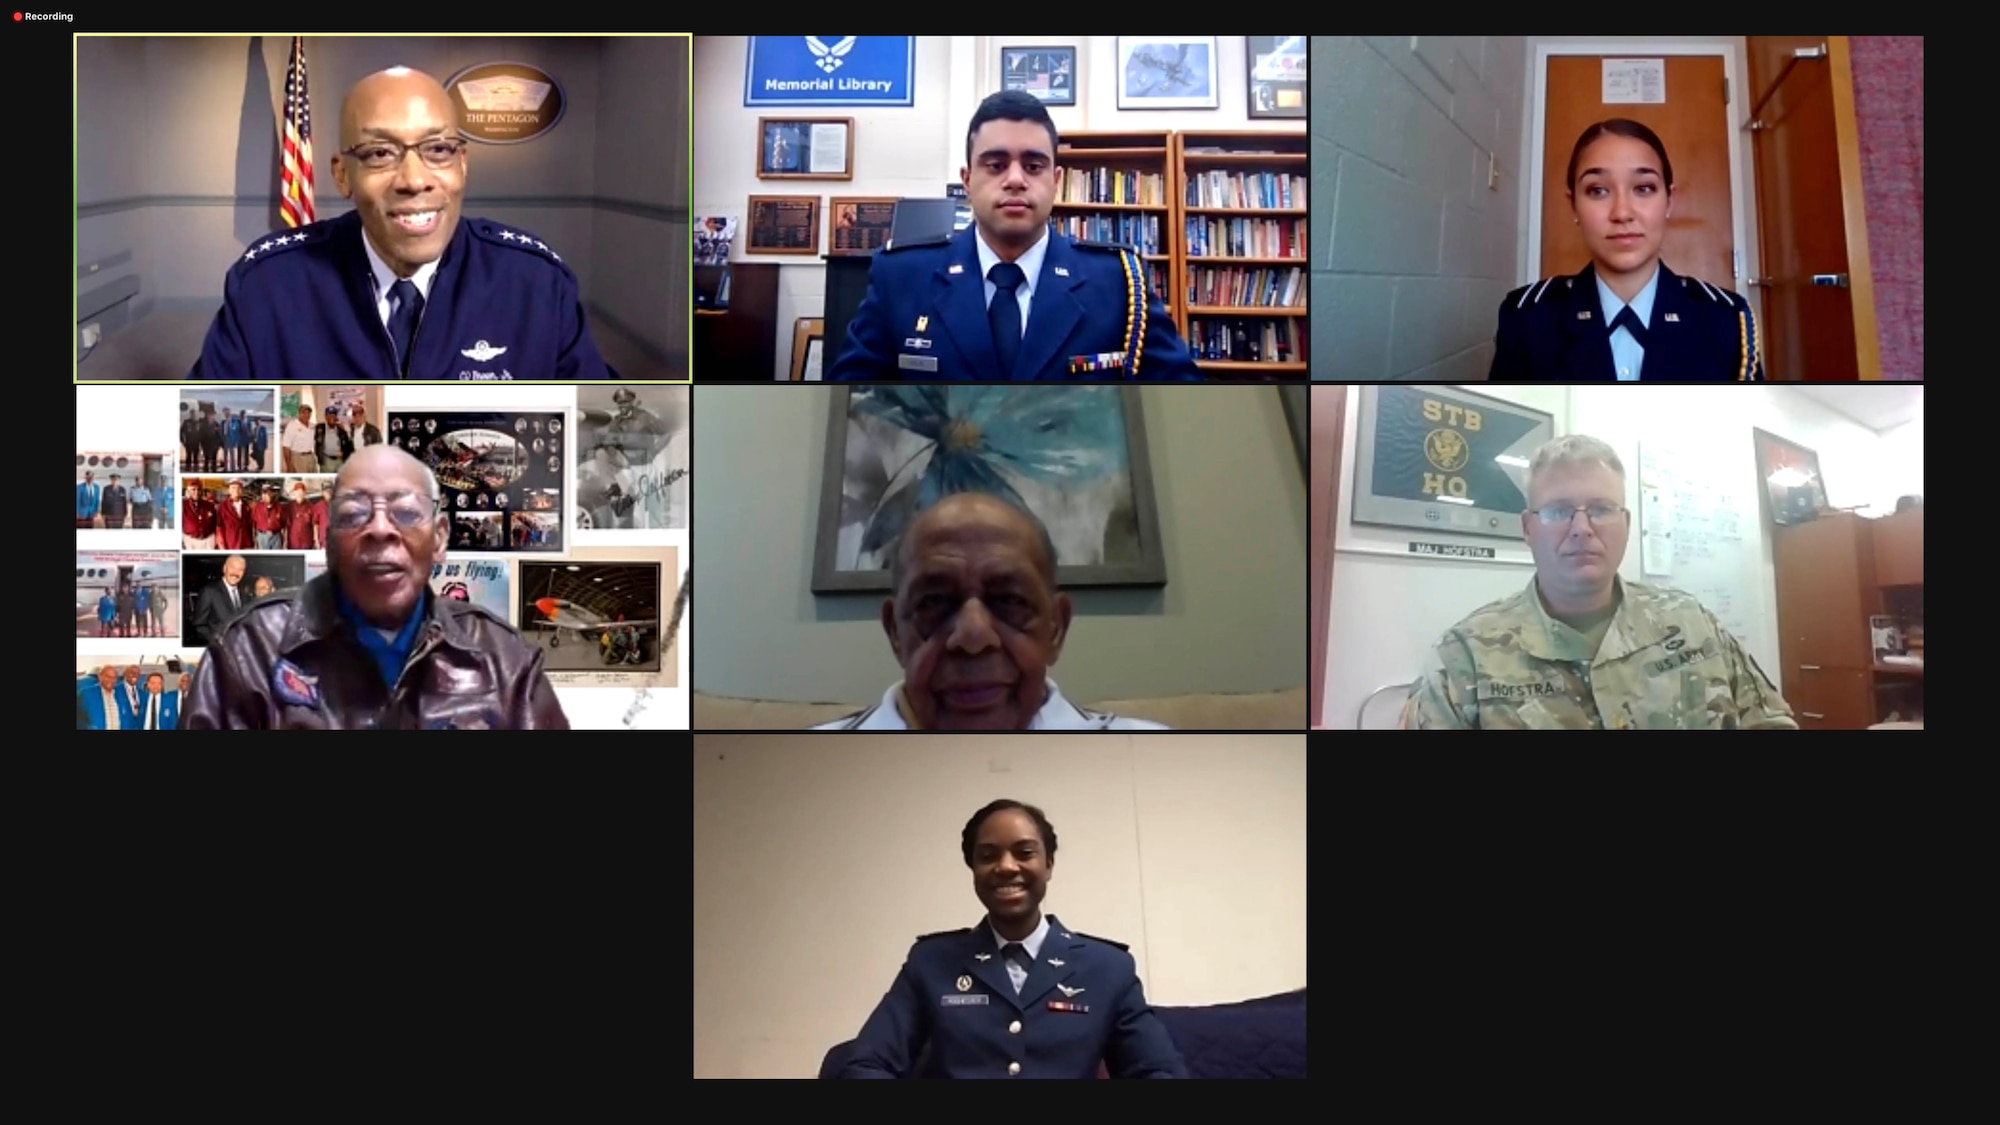 Air Force Chief of Staff Gen. Charles Q. Brown, Jr. interviewed two Tuskegee Airmen, during a virtual roundtable, Oct. 20, 2020, in observance of the 75th anniversary of the end of World War II. The event was part of the American Veterans Center’s 23rd Annual Veterans Conference, which will premiere on Oct. 28. (U.S. Air Force graphic)